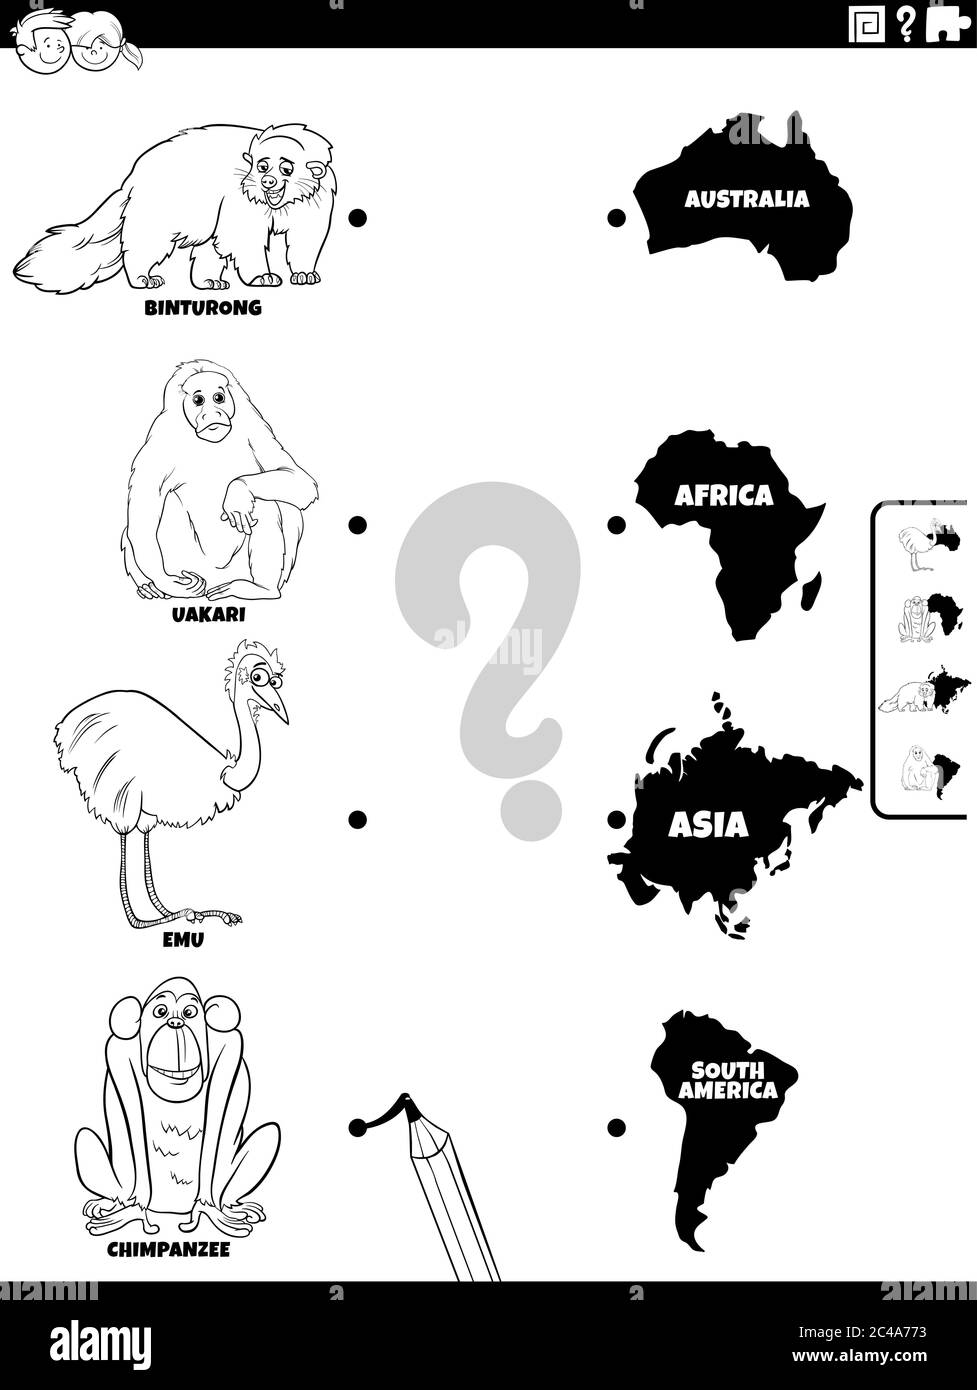 Black and White Cartoon Illustration of Educational Matching Game for Children with Wild Animal Species Characters and Continent Shapes Coloring Book Stock Vector